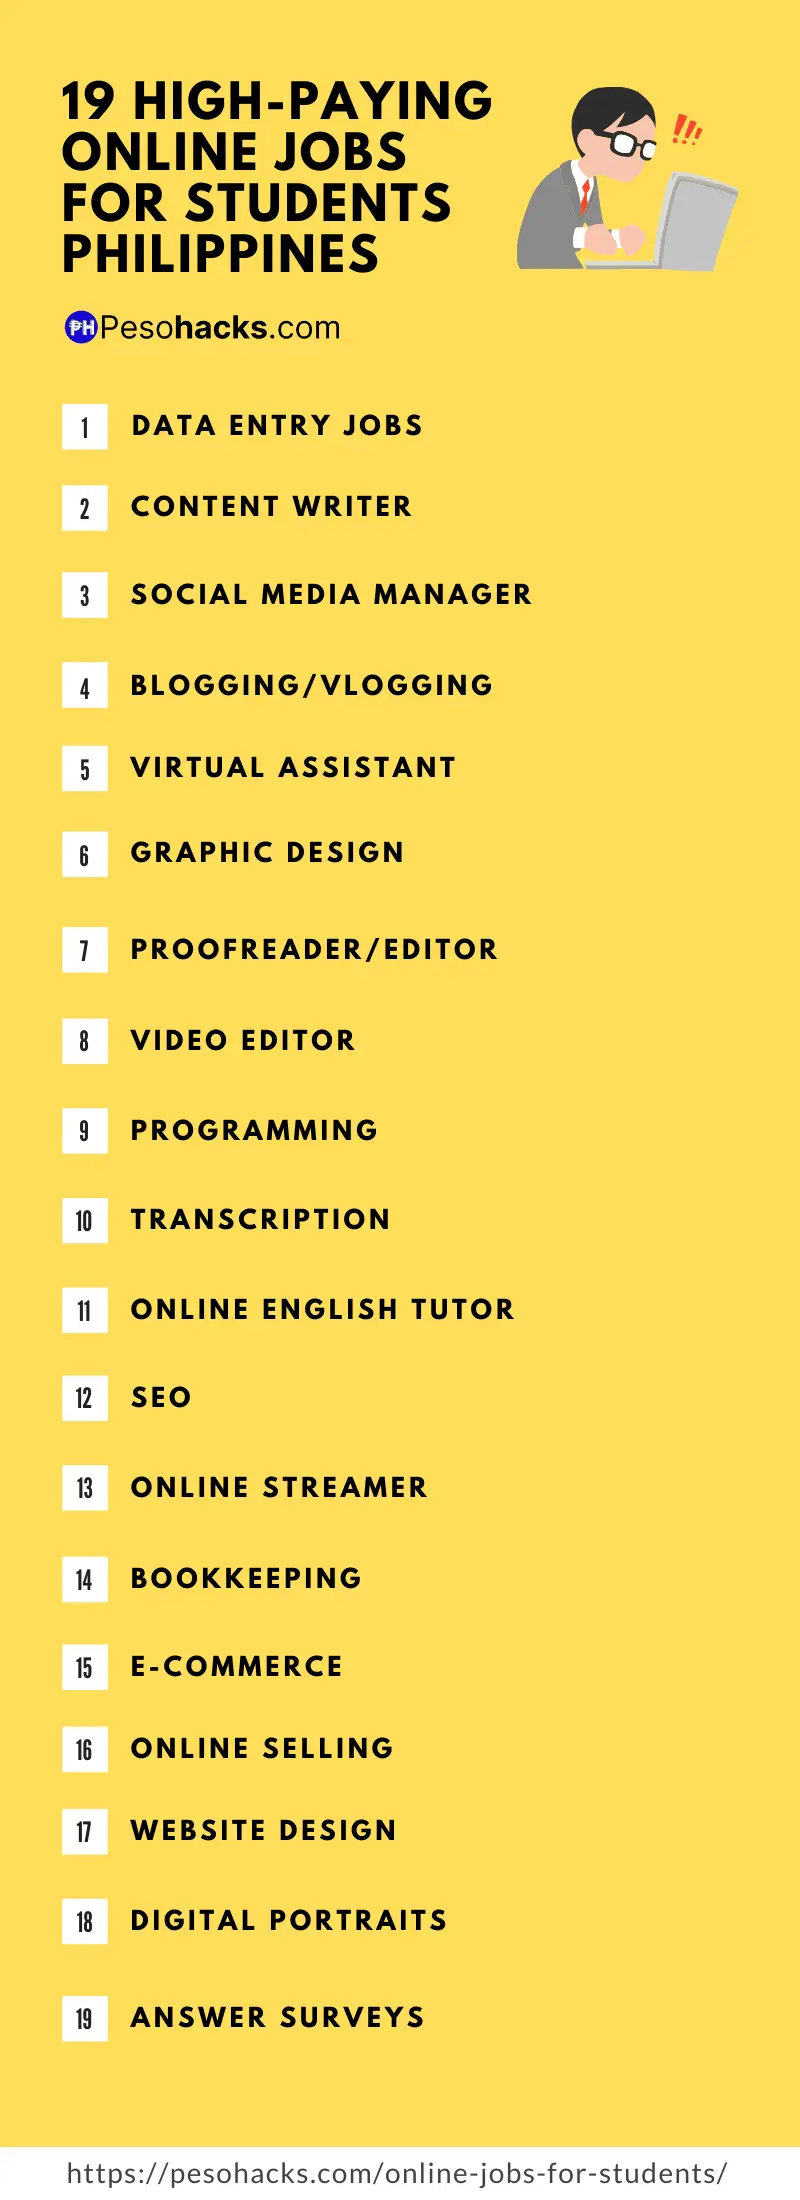 Online jobs for students Philippines